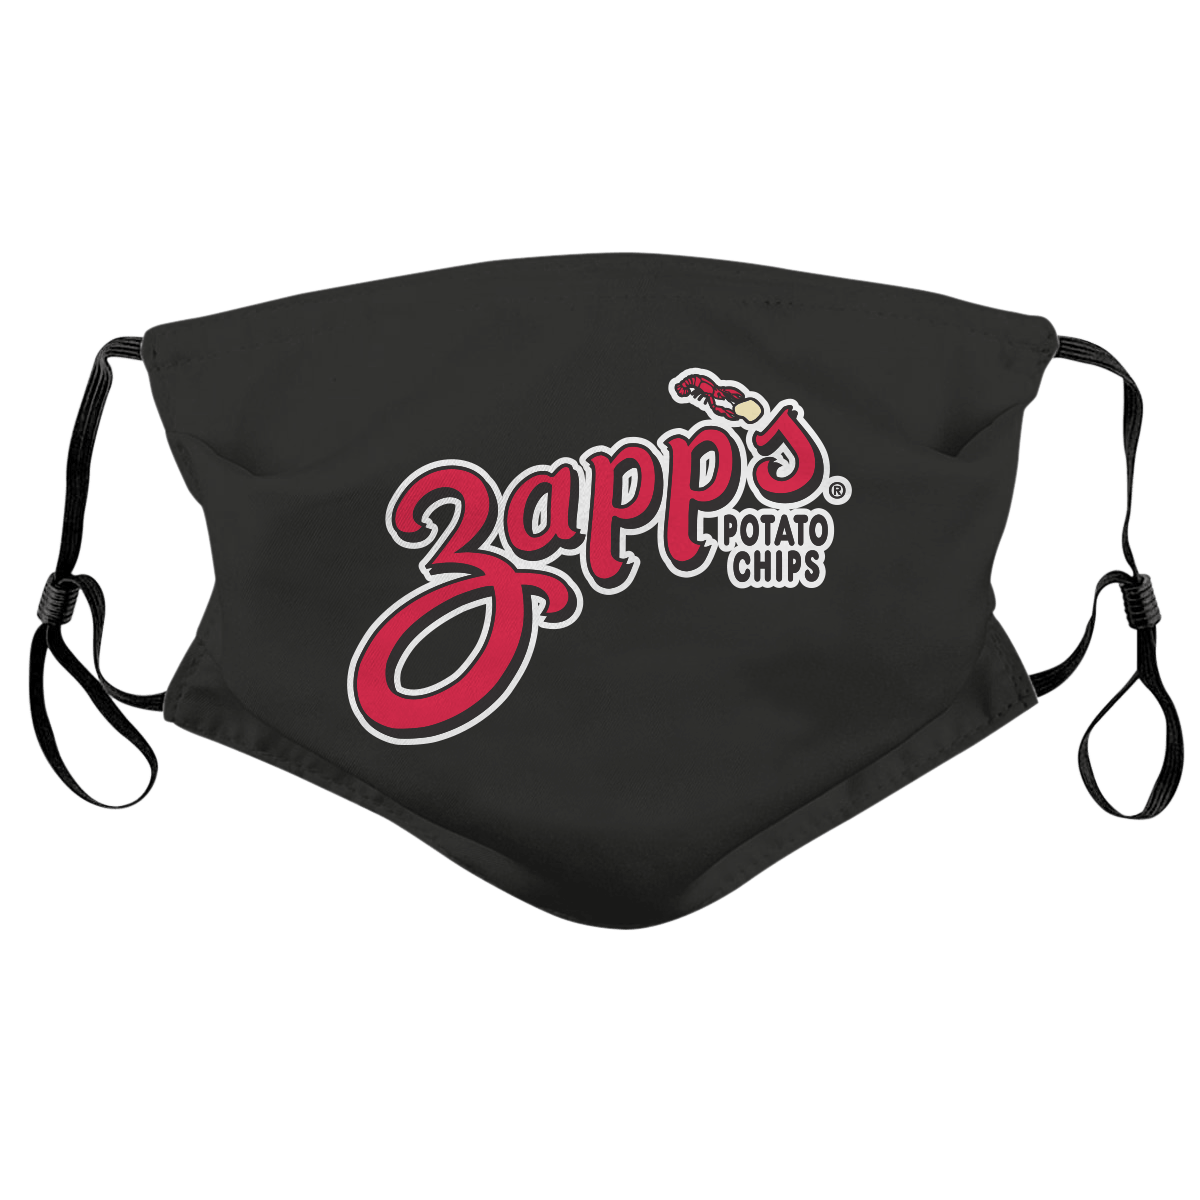 Zapp's / Face Mask - Route One Apparel